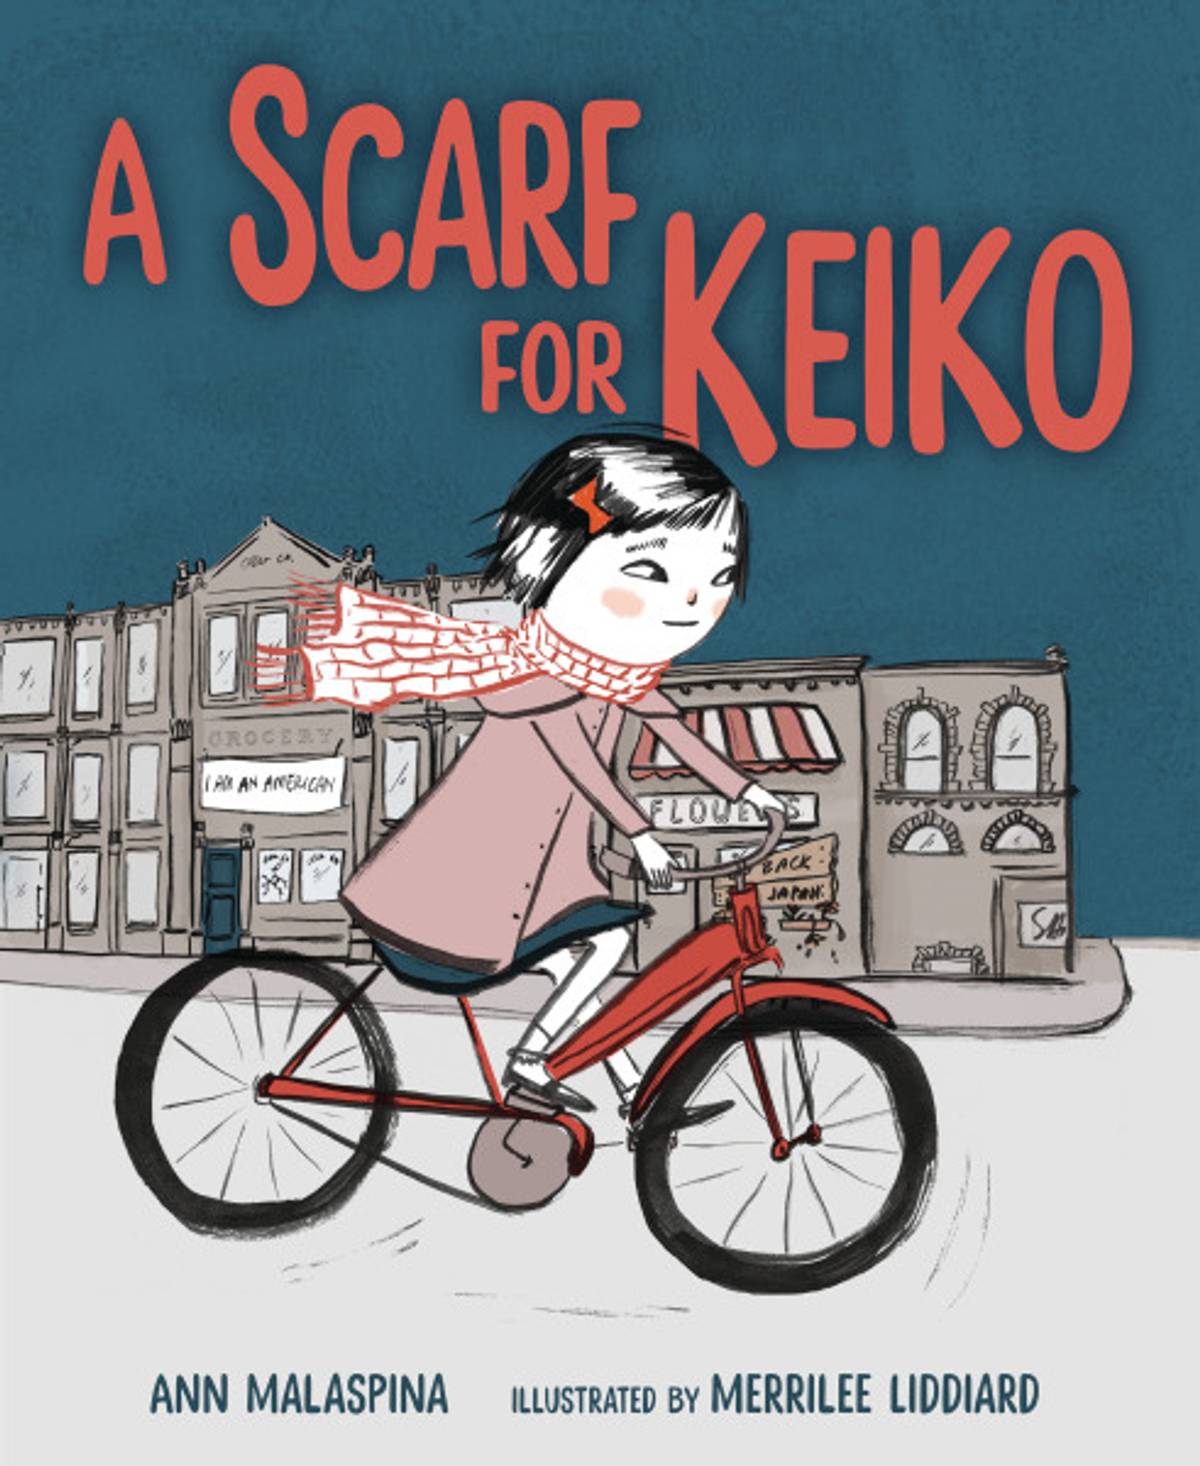 ‘A Scarf for Keiko,’ by Ann Malaspina, illustrated by Merrilee Liddiard (Published by Kar-Ben)